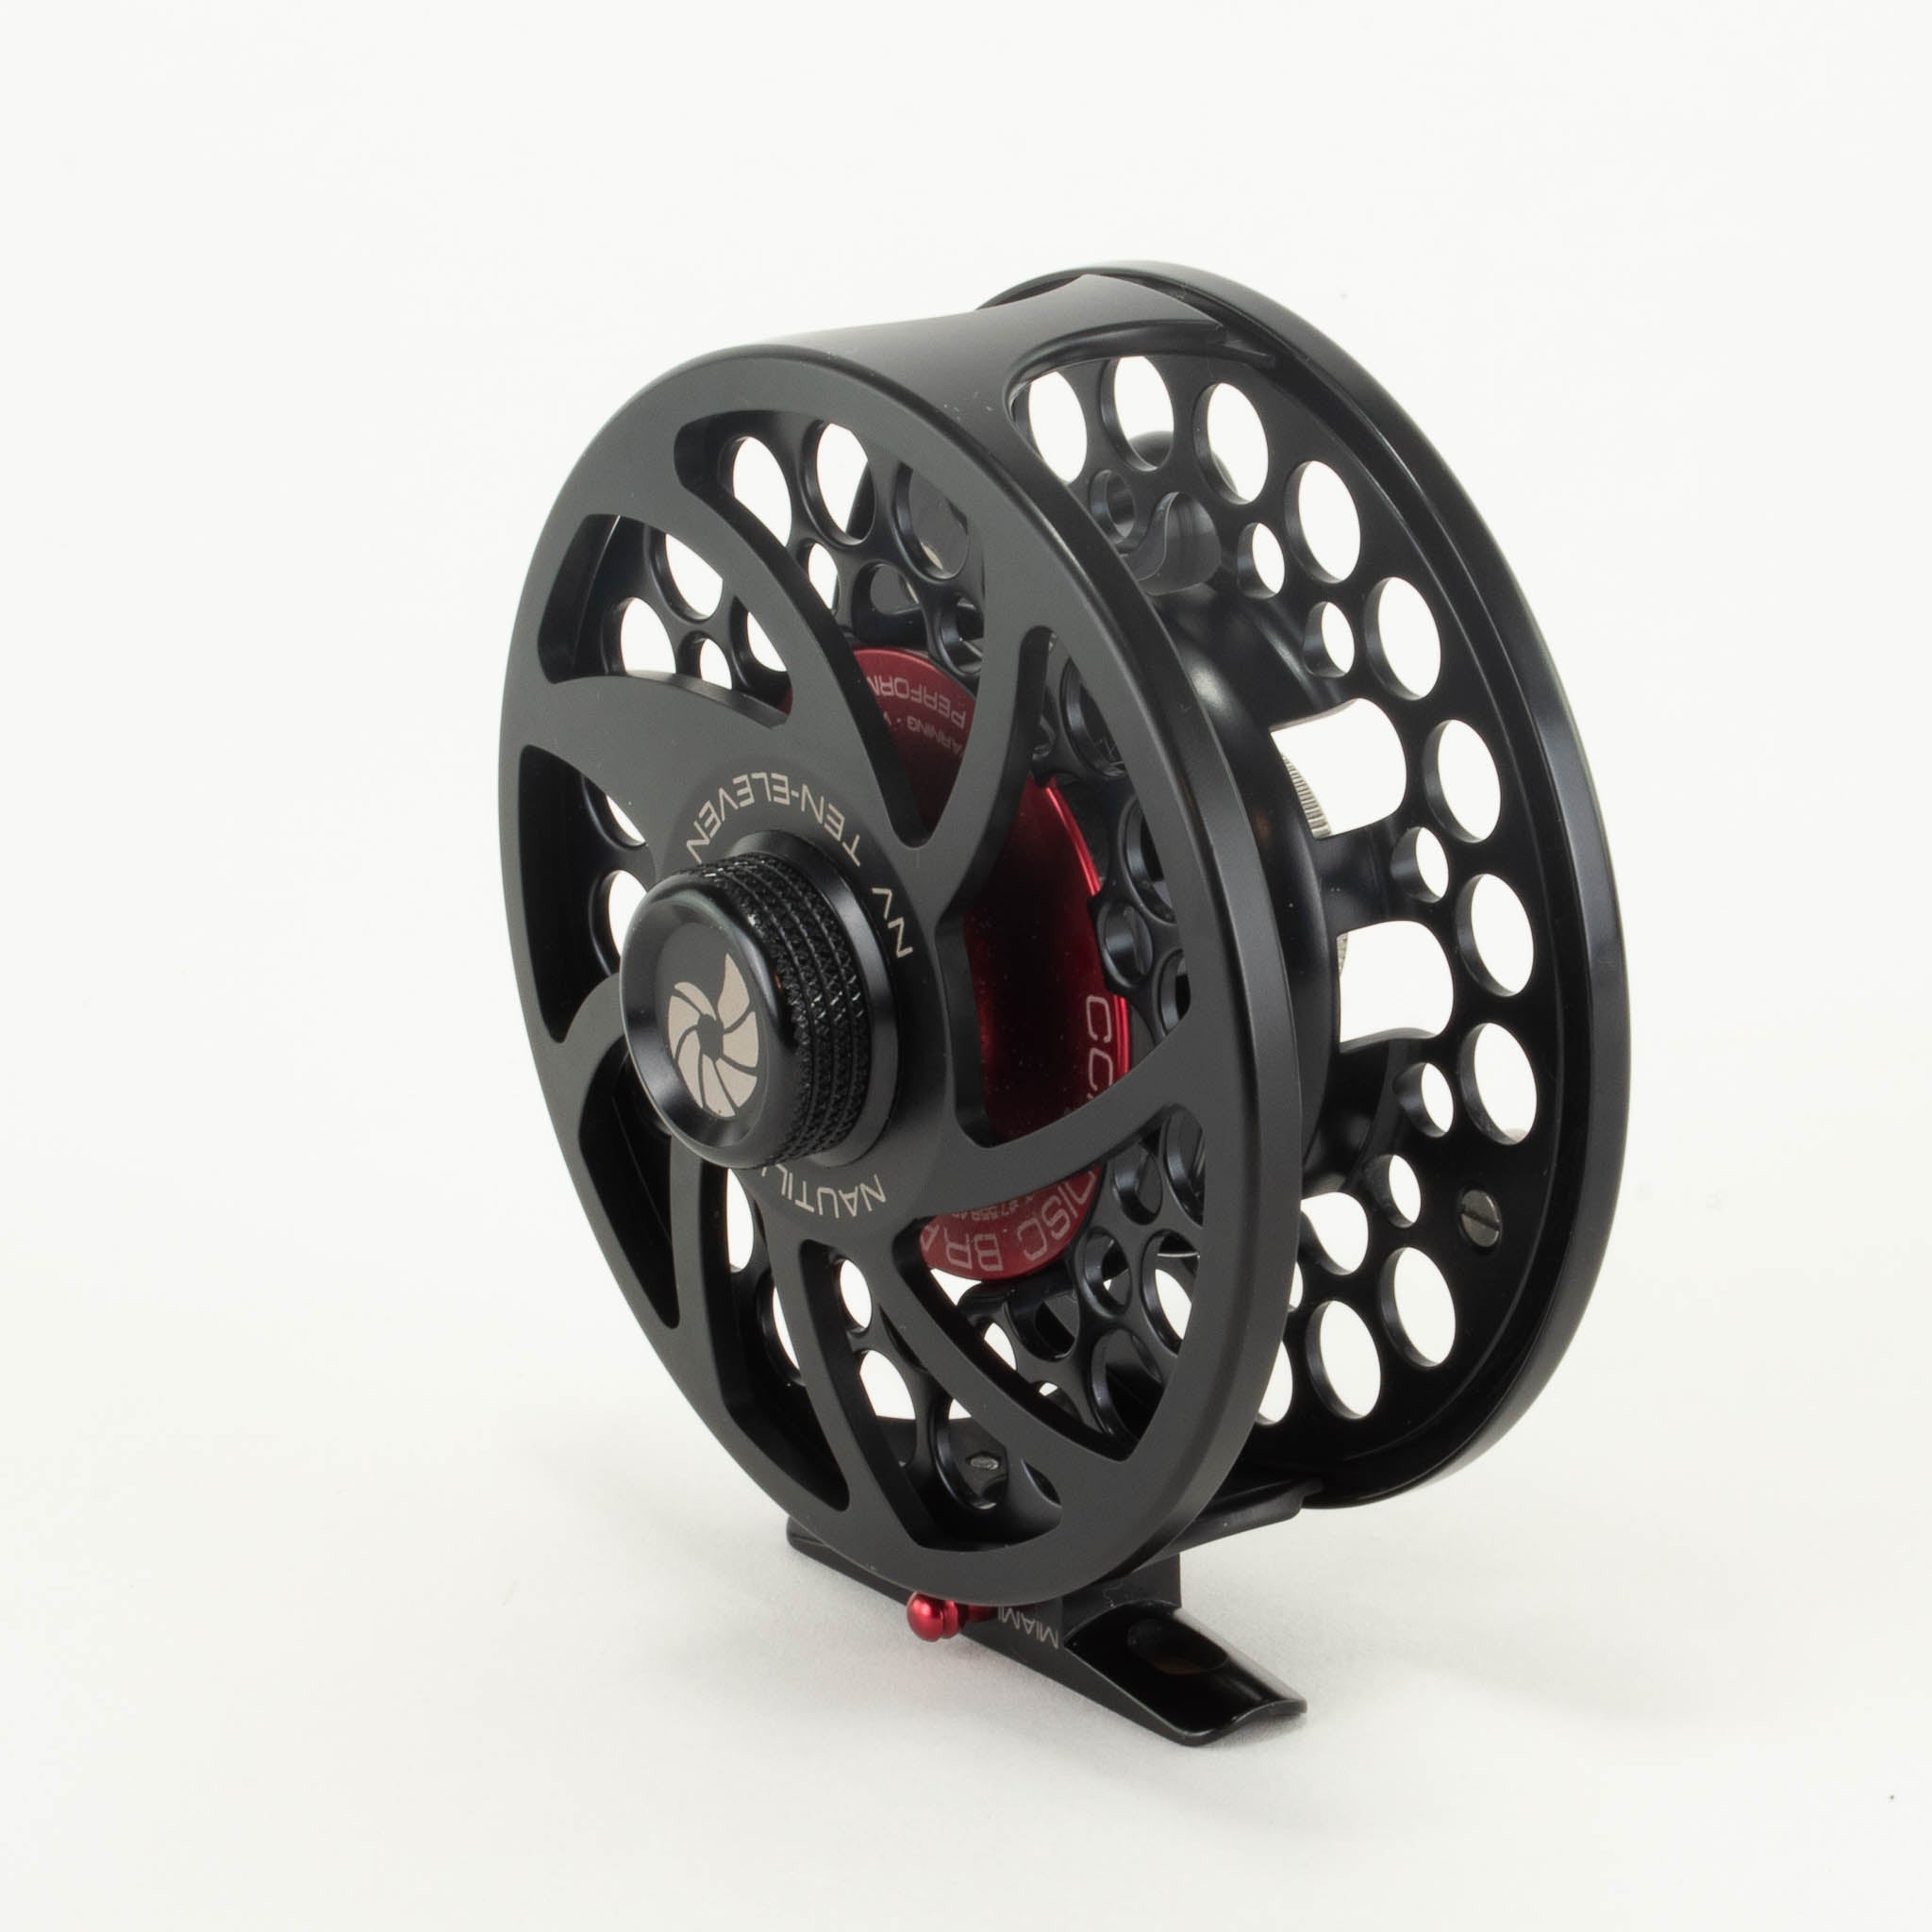 Nautilus NV 10-11 Fly Reel – Outfishers